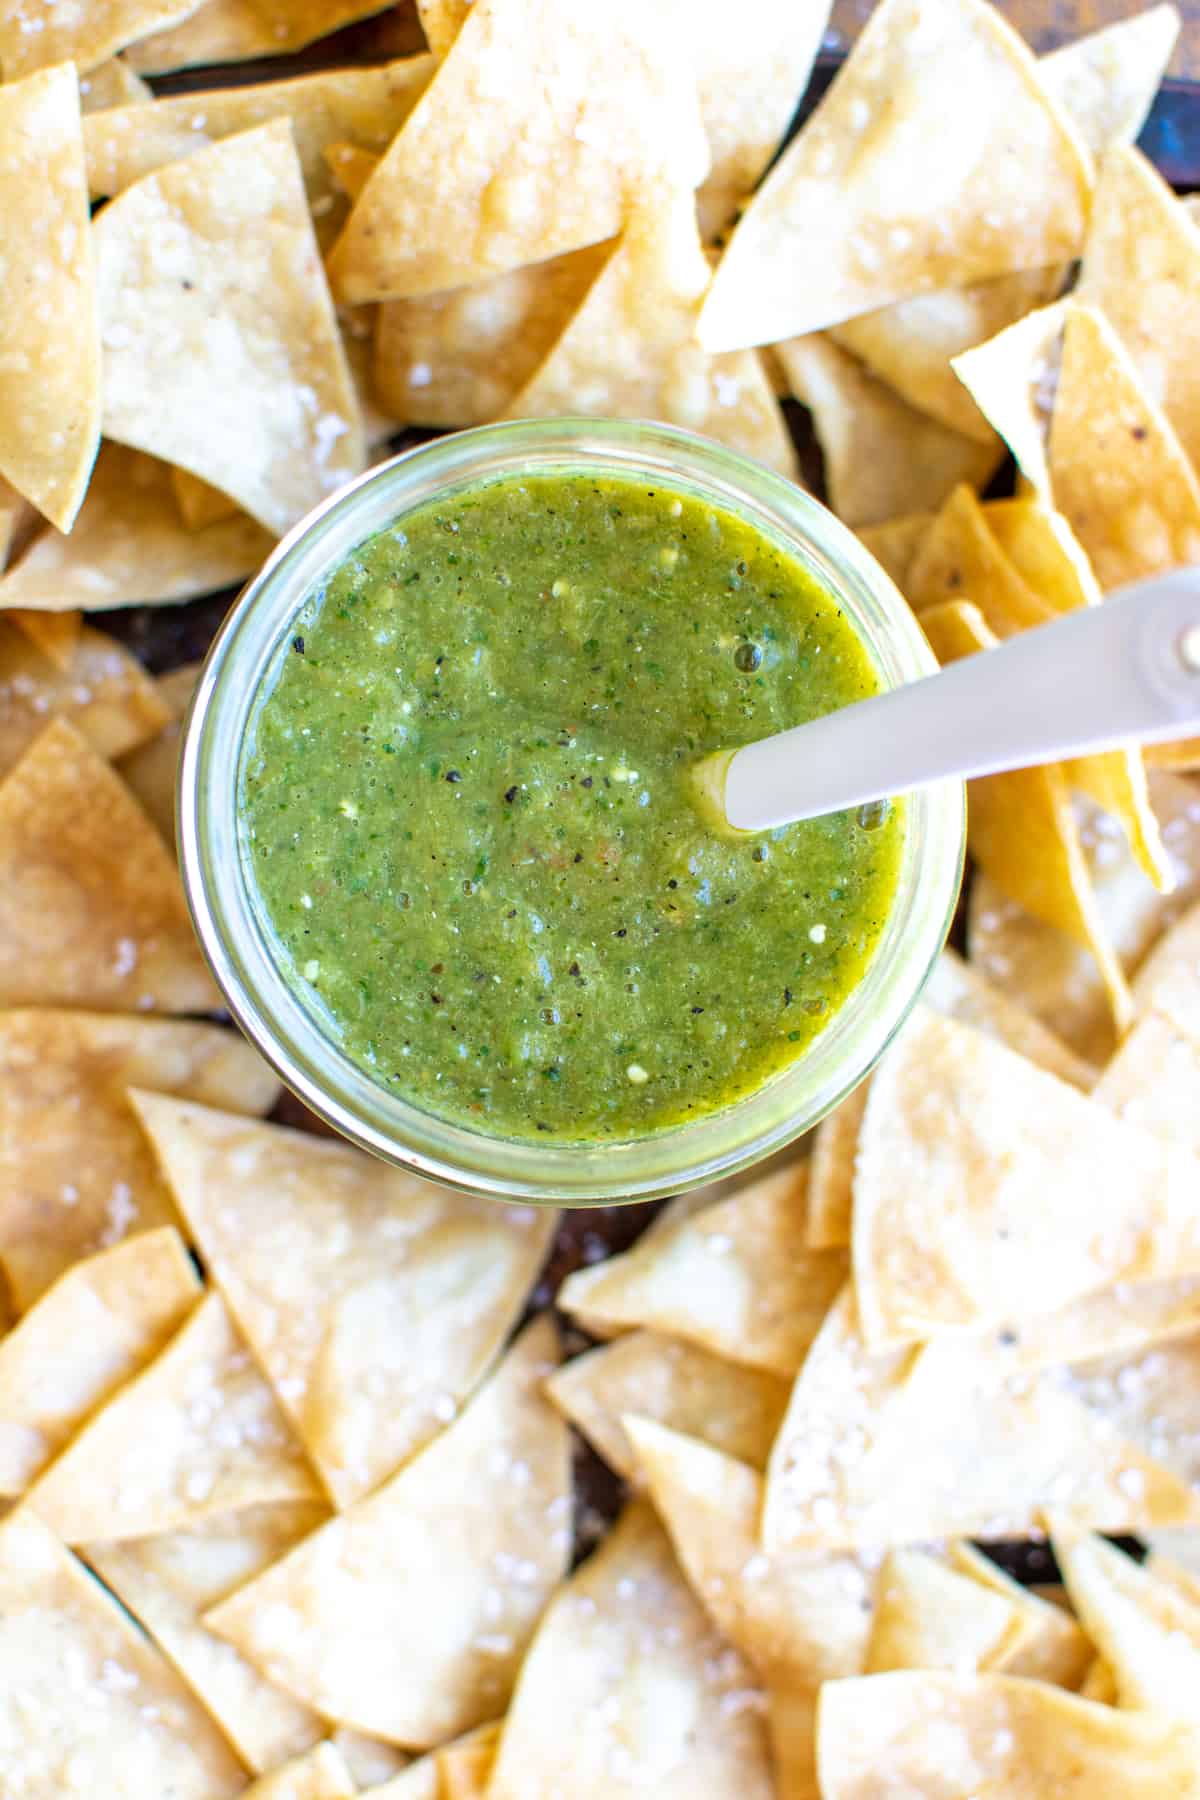 A jar of green salsa sitting in the middle of a large pile of tortilla chips.